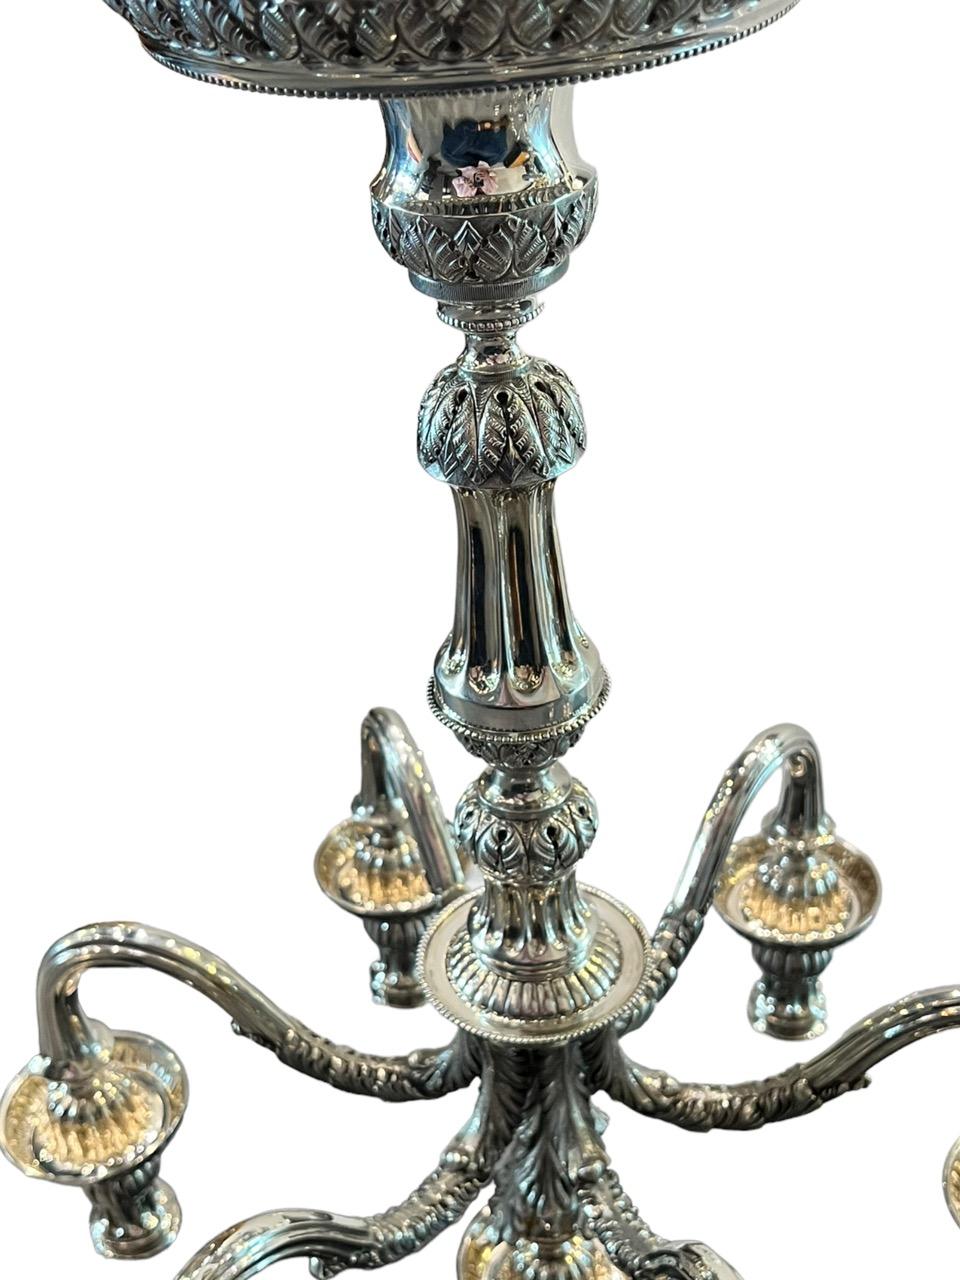 1910 Italian Pair of Sterling Silver Candelabras, Tall and Heavy For Sale 4